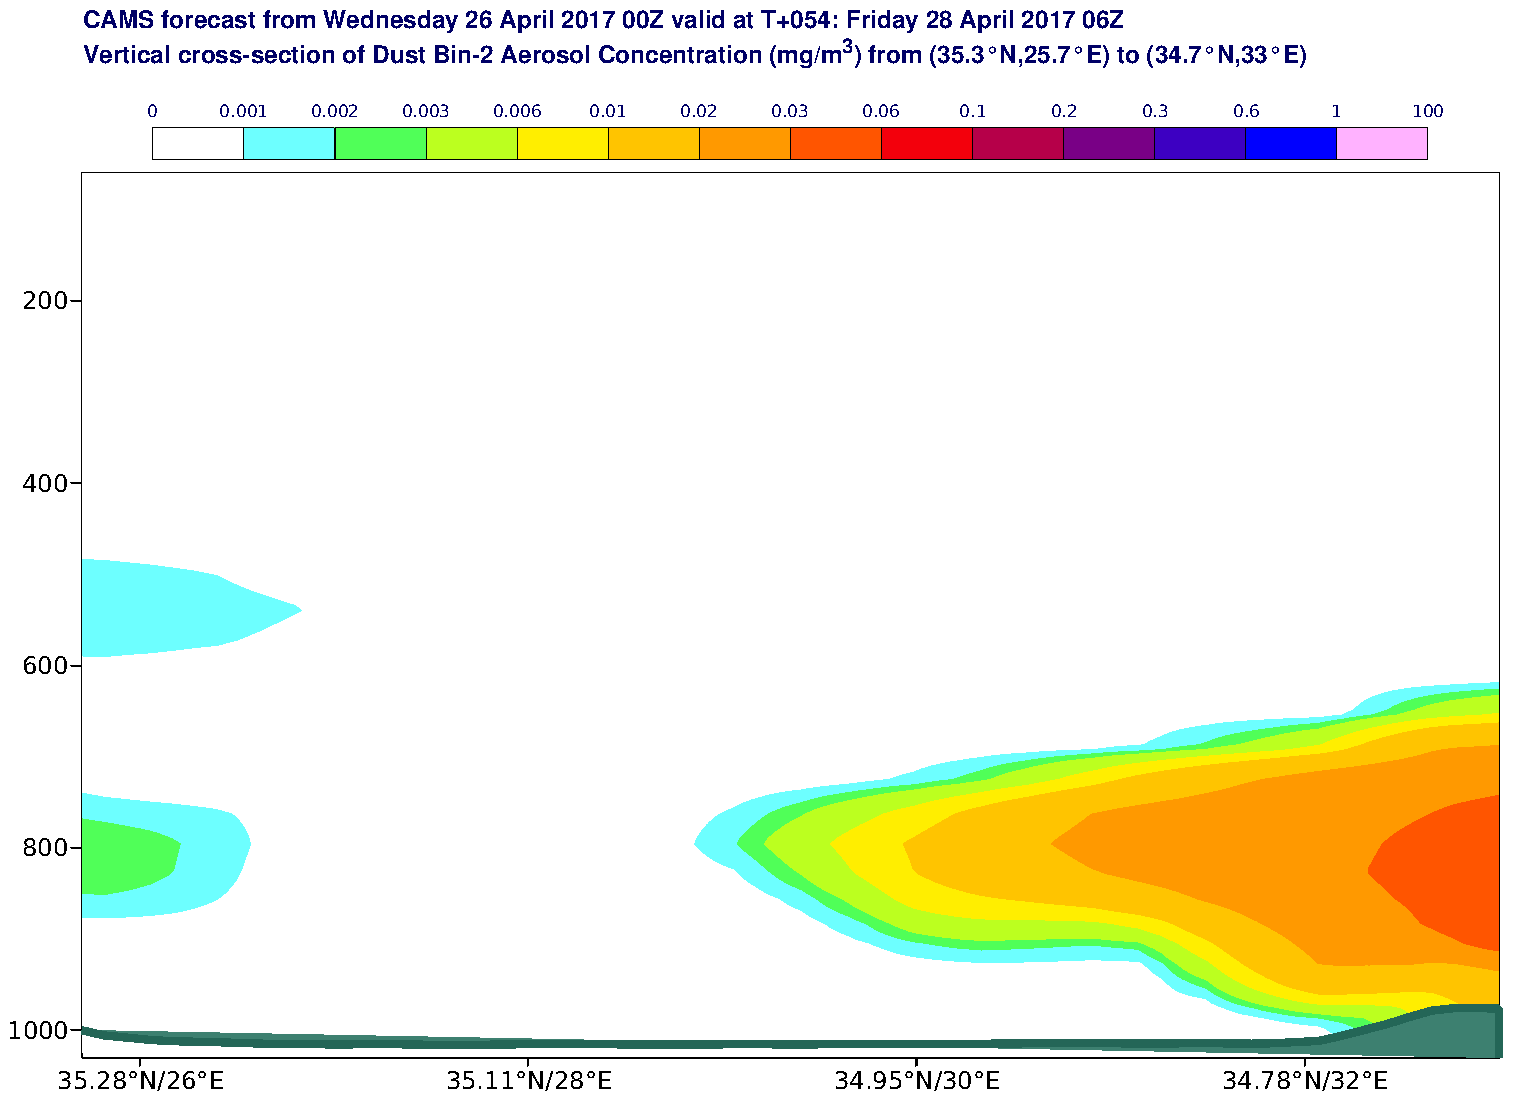 Vertical cross-section of Dust Bin-2 Aerosol Concentration (mg/m3) valid at T54 - 2017-04-28 06:00